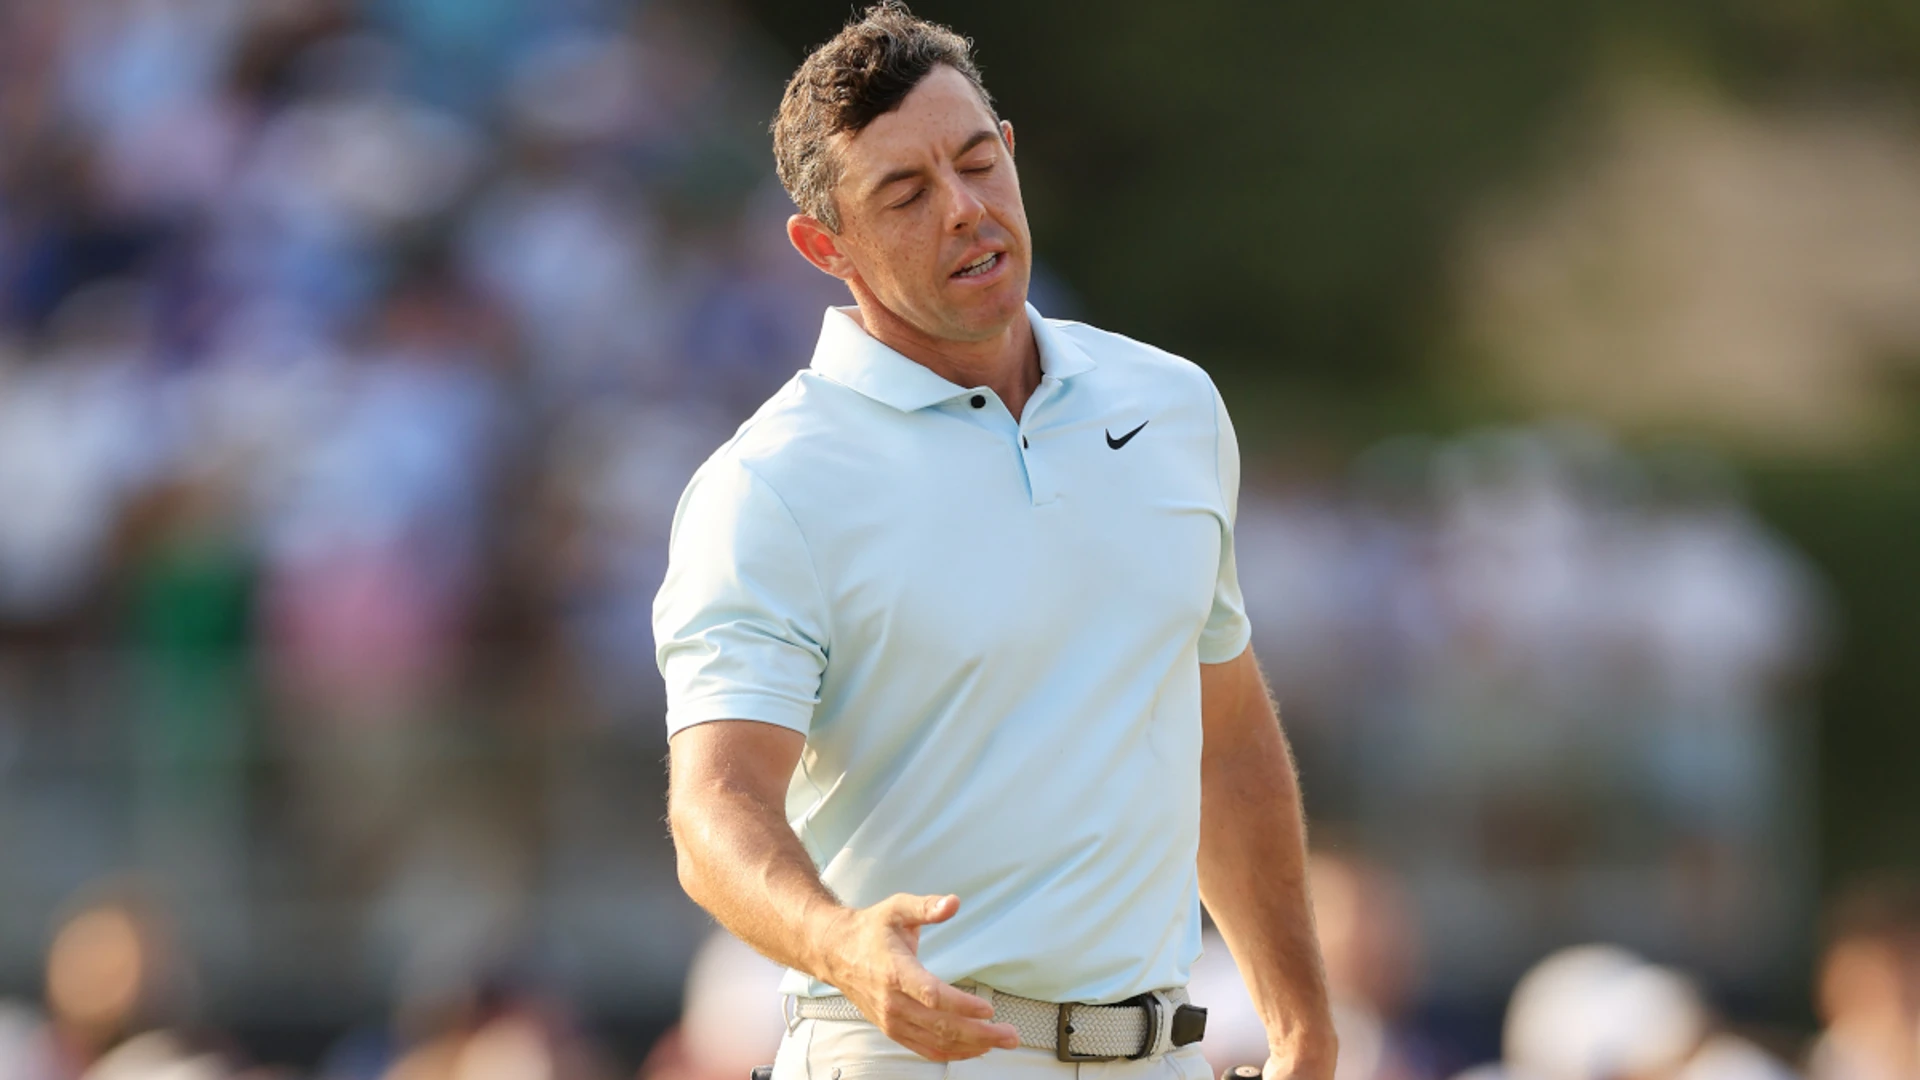 Monahan says McIlroy break 'exactly' what he should do